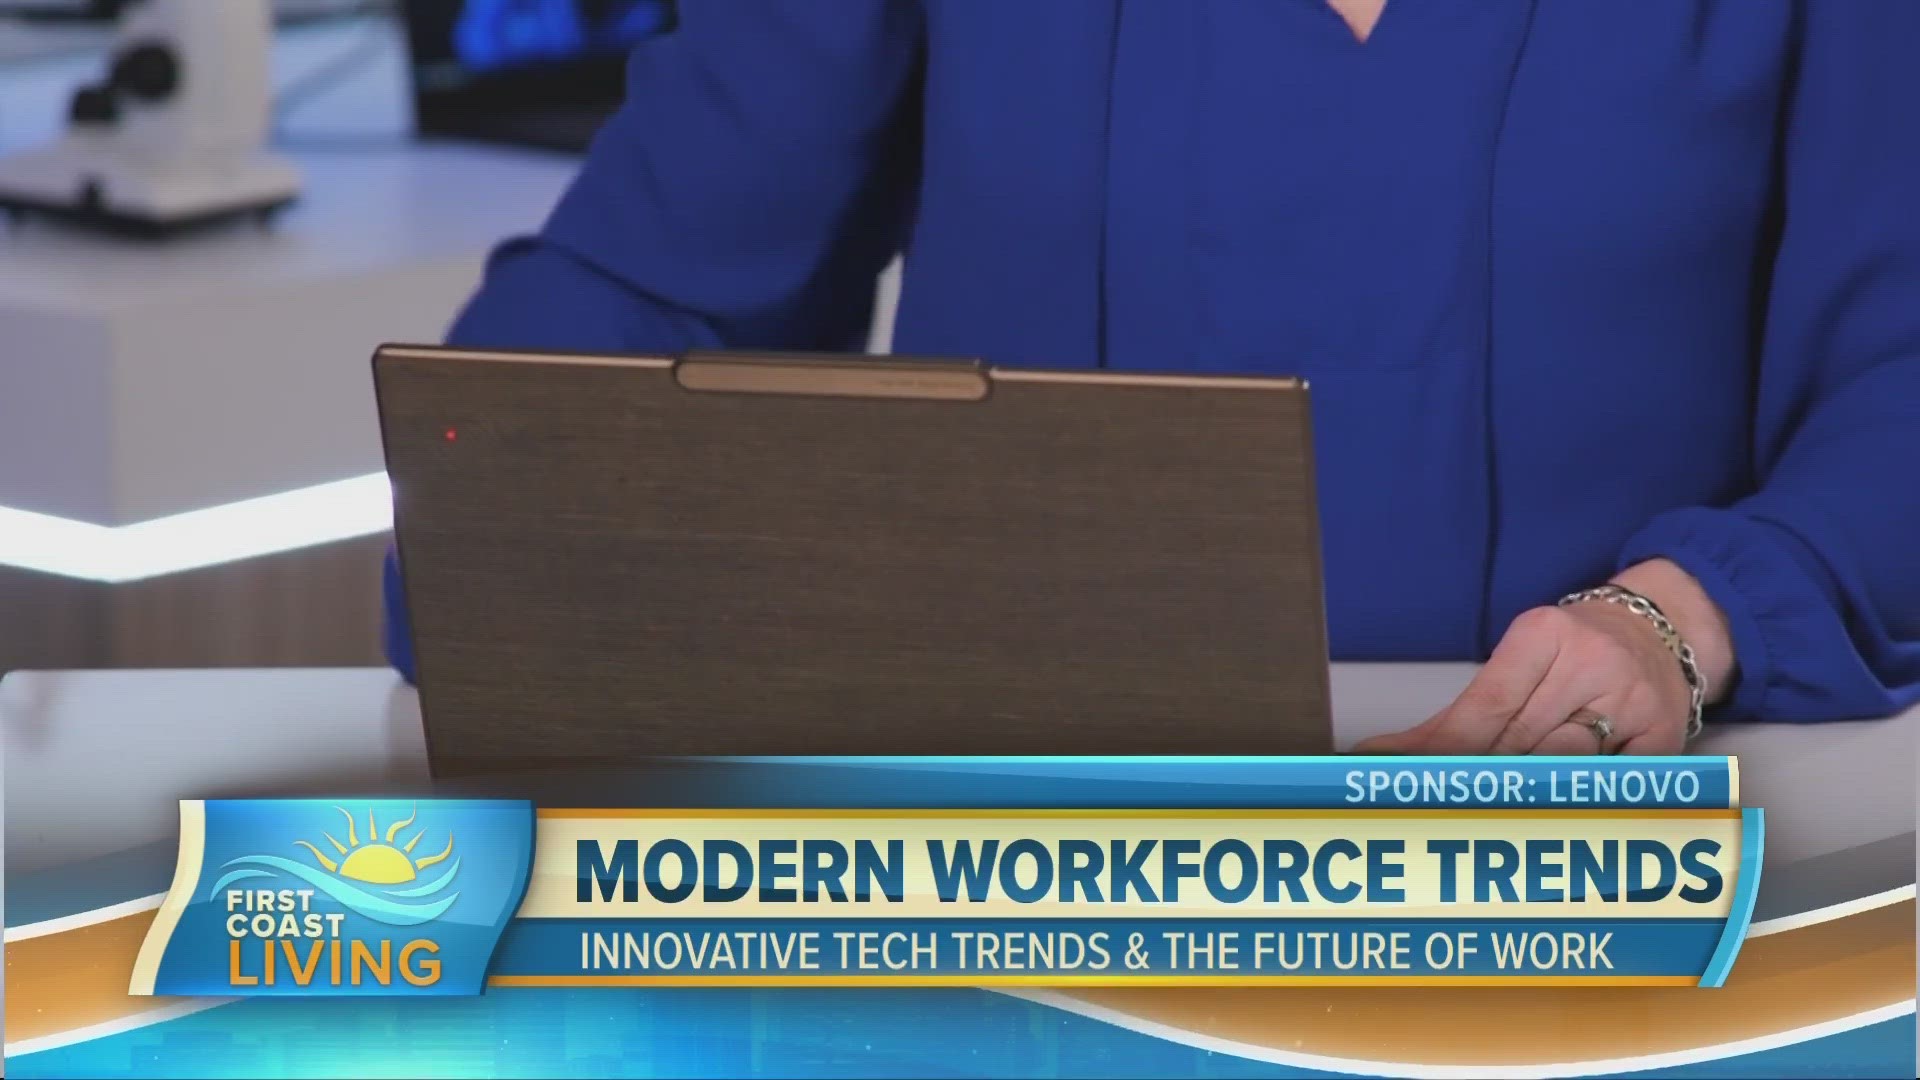 Current workplace trends show that the way employees work will continue to change. Learn about innovative tech trends and the future of work.